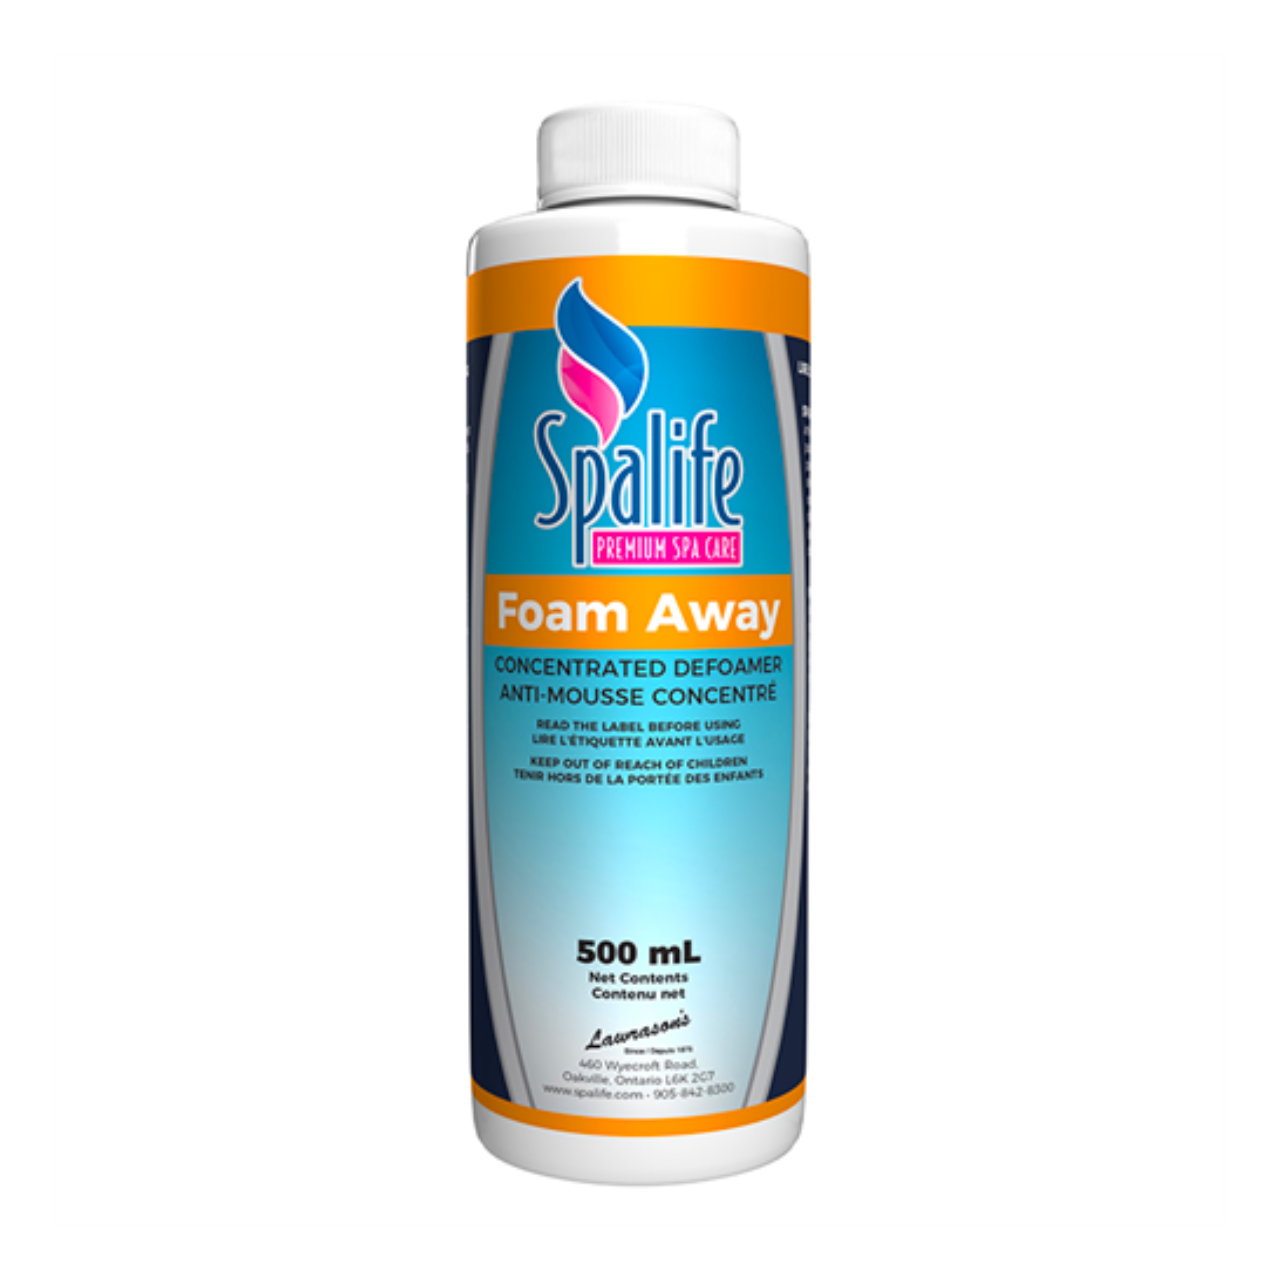 Spa Life Foam Away - Concentrated Defoamer